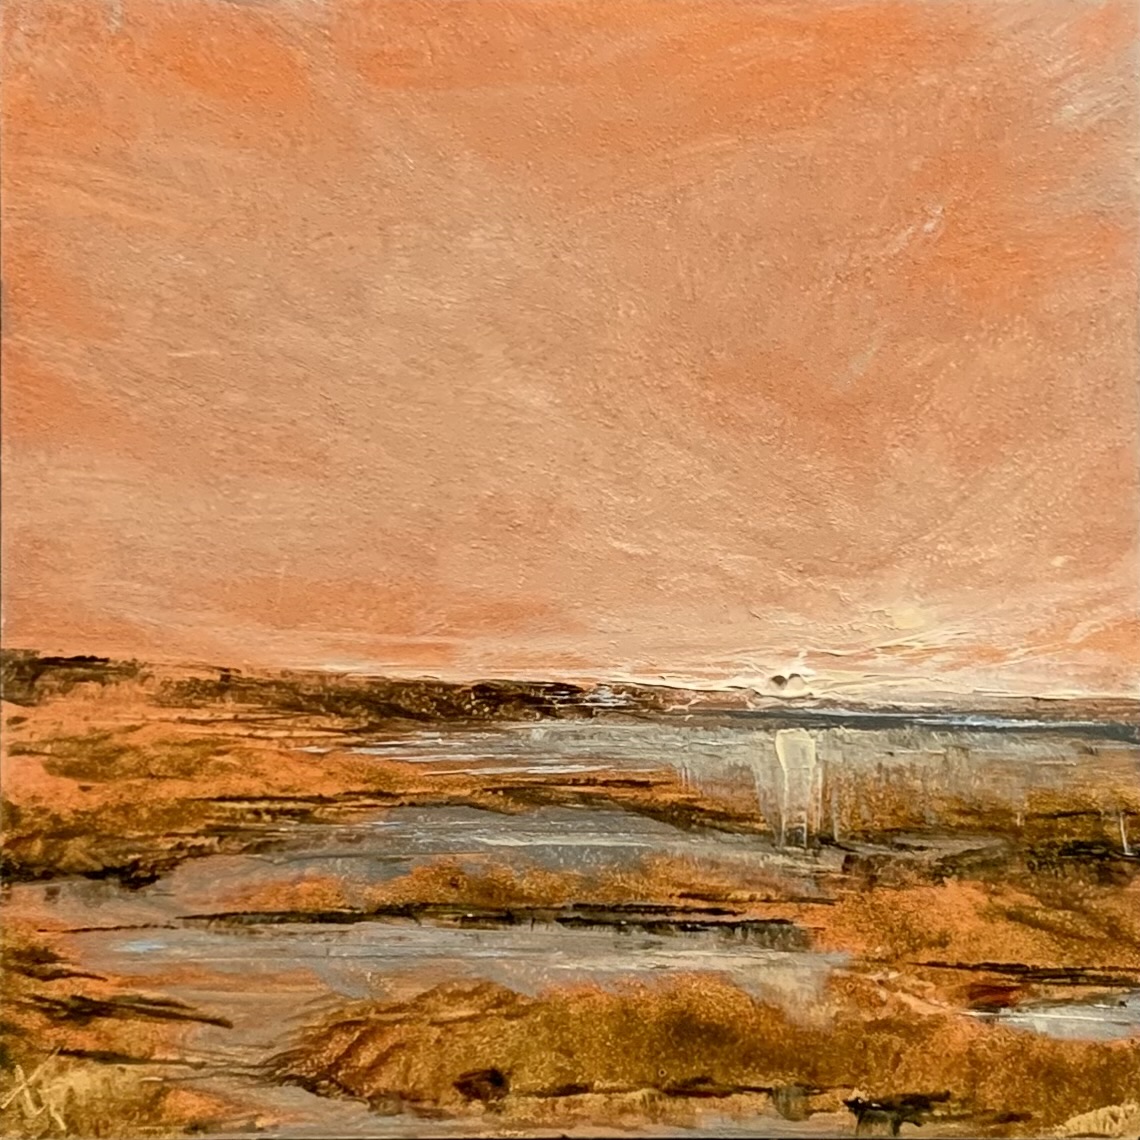 Original oil painting by Tisha Mark, Week 1, 52 Weeks of Finding Light Series, 4"x4" oil on Gessobord (2023). This painting shows an orange-toned sunrise sky over a coastal marsh landscape.